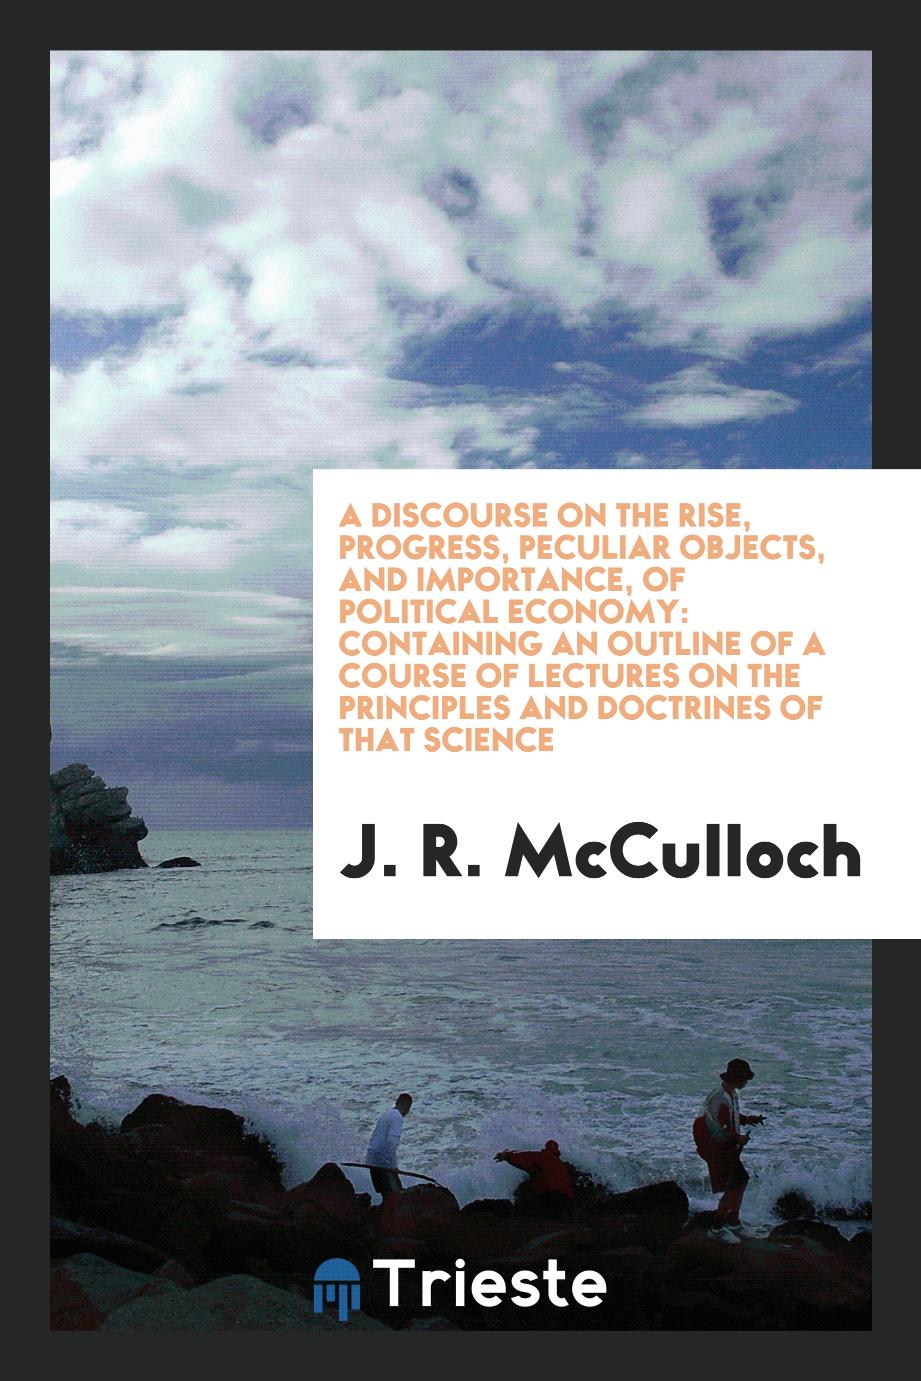 A Discourse on the Rise, Progress, Peculiar Objects, and Importance, of Political Economy: Containing an Outline of a Course of Lectures on the Principles and Doctrines of That Science